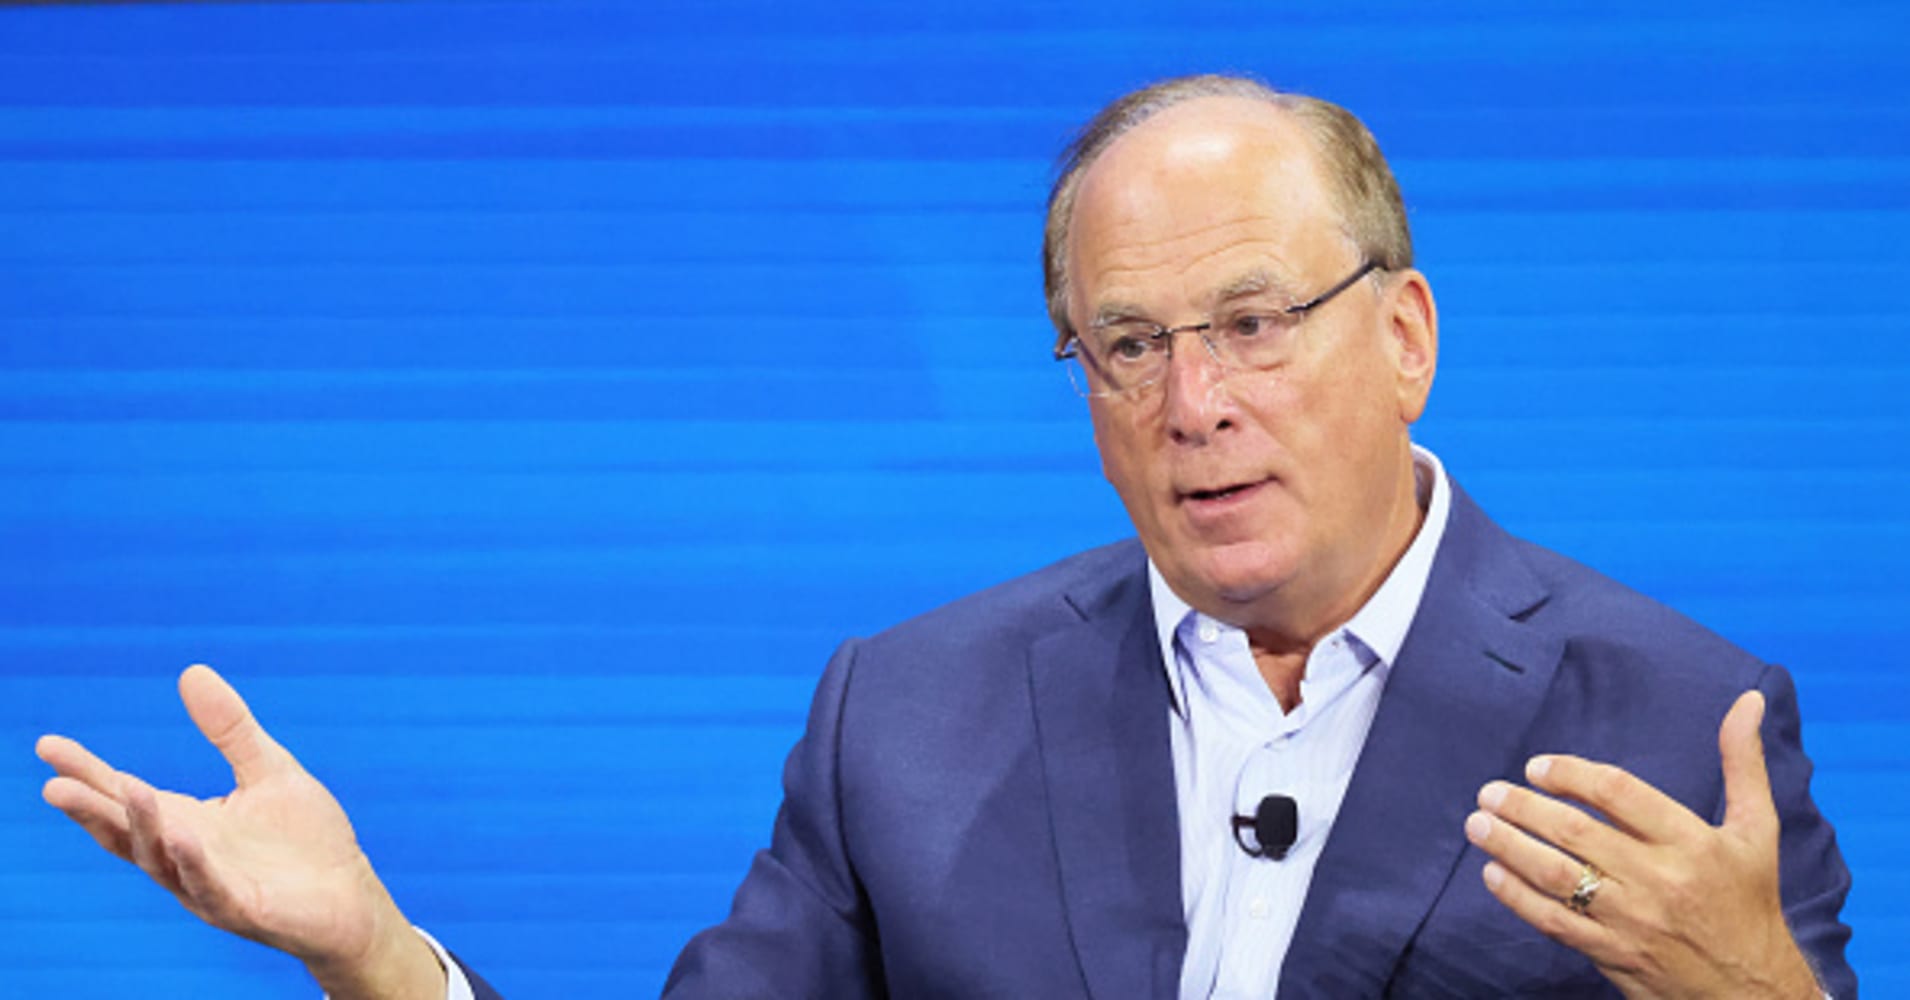 blackrock ceo larry fink says 65 retirement age is too low. here's what experts say